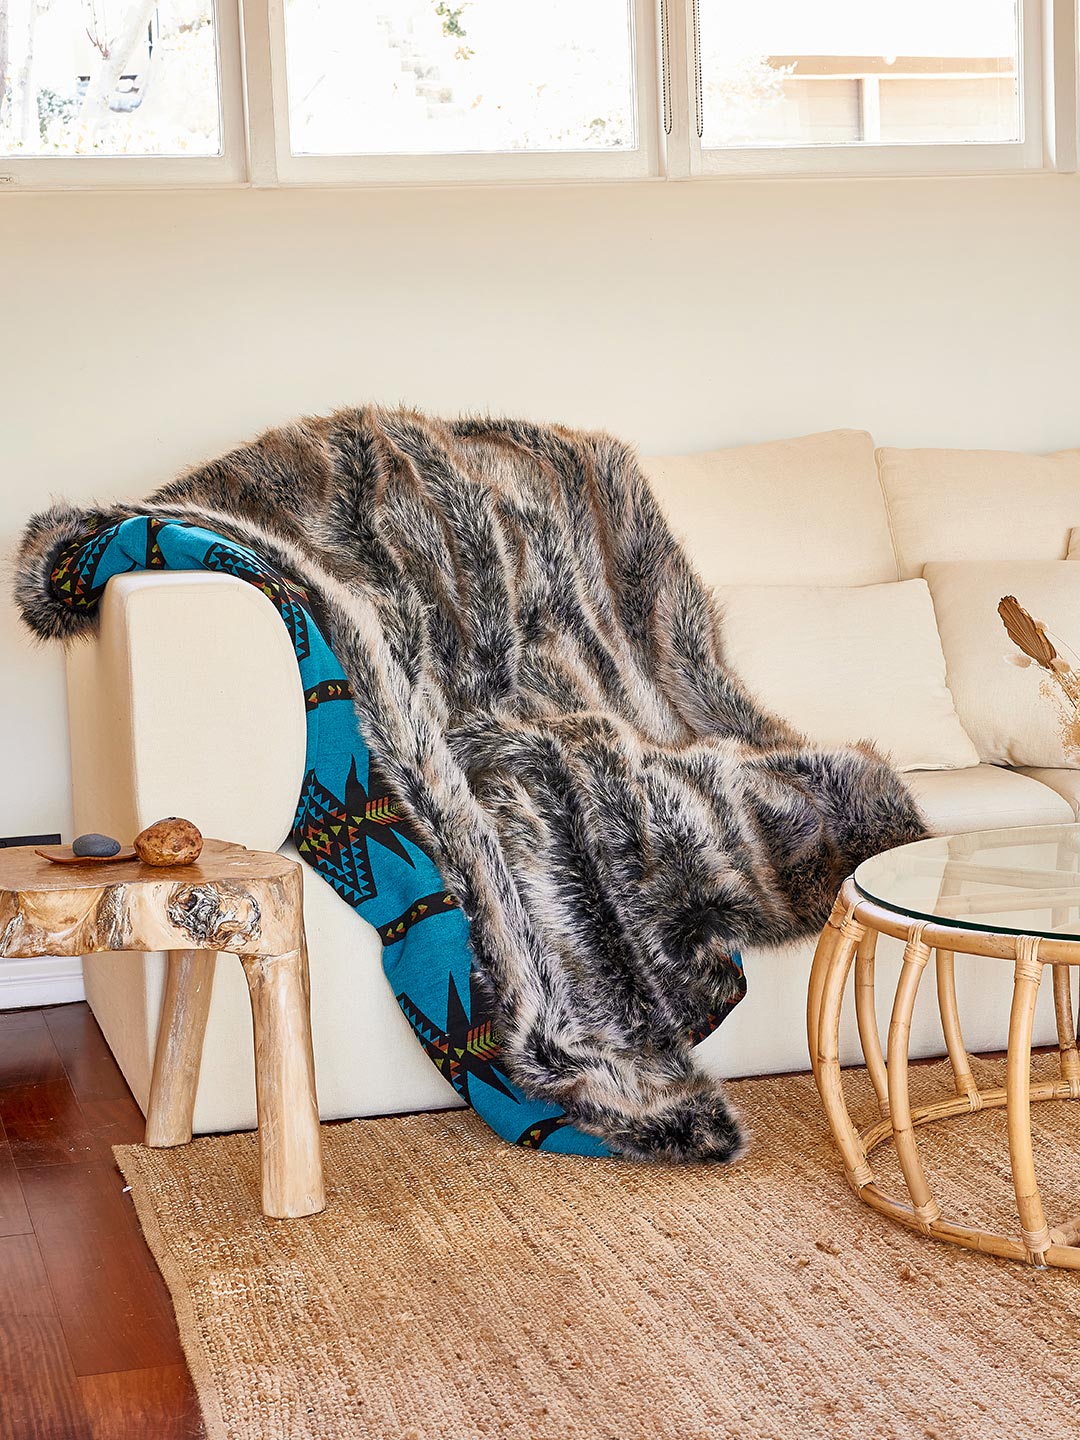 Exterior and Liner View of Grey Wolf Faux Fur Throw on Couch